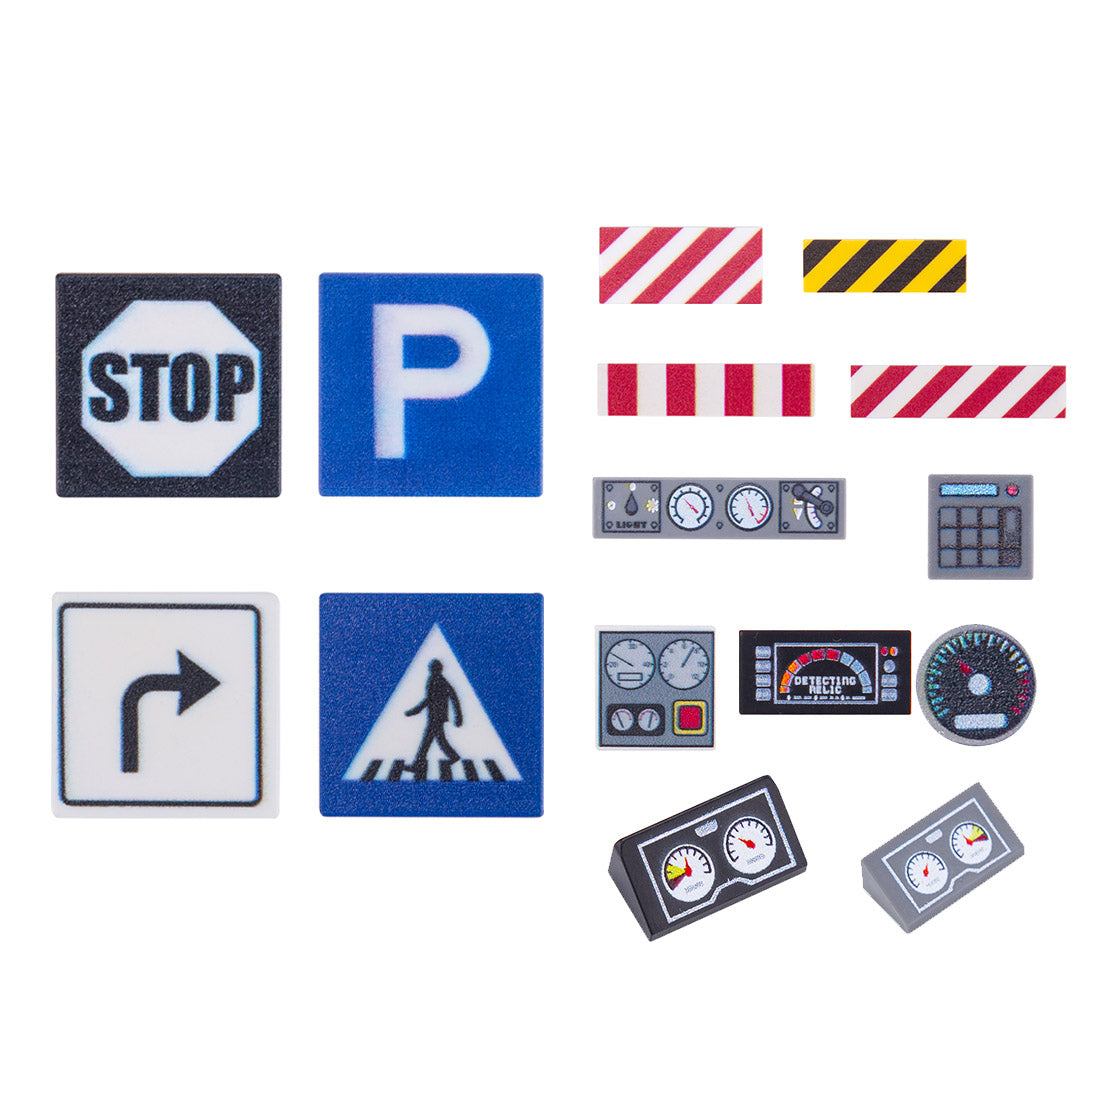 Traffic Road Signs and Dashboard Style Building Blocks Part